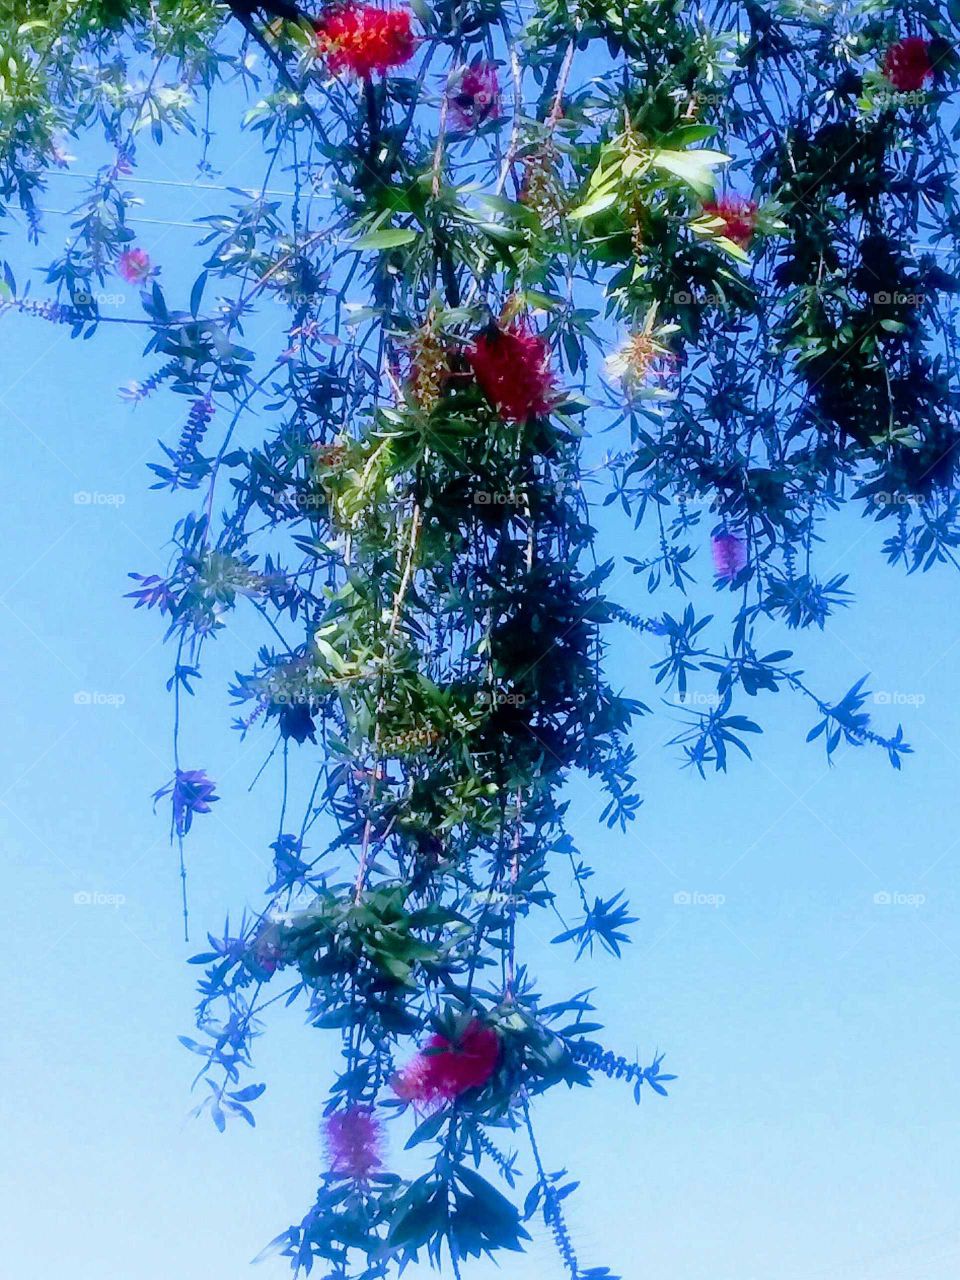 Stylized Blossoms Blurred by Blue Sky